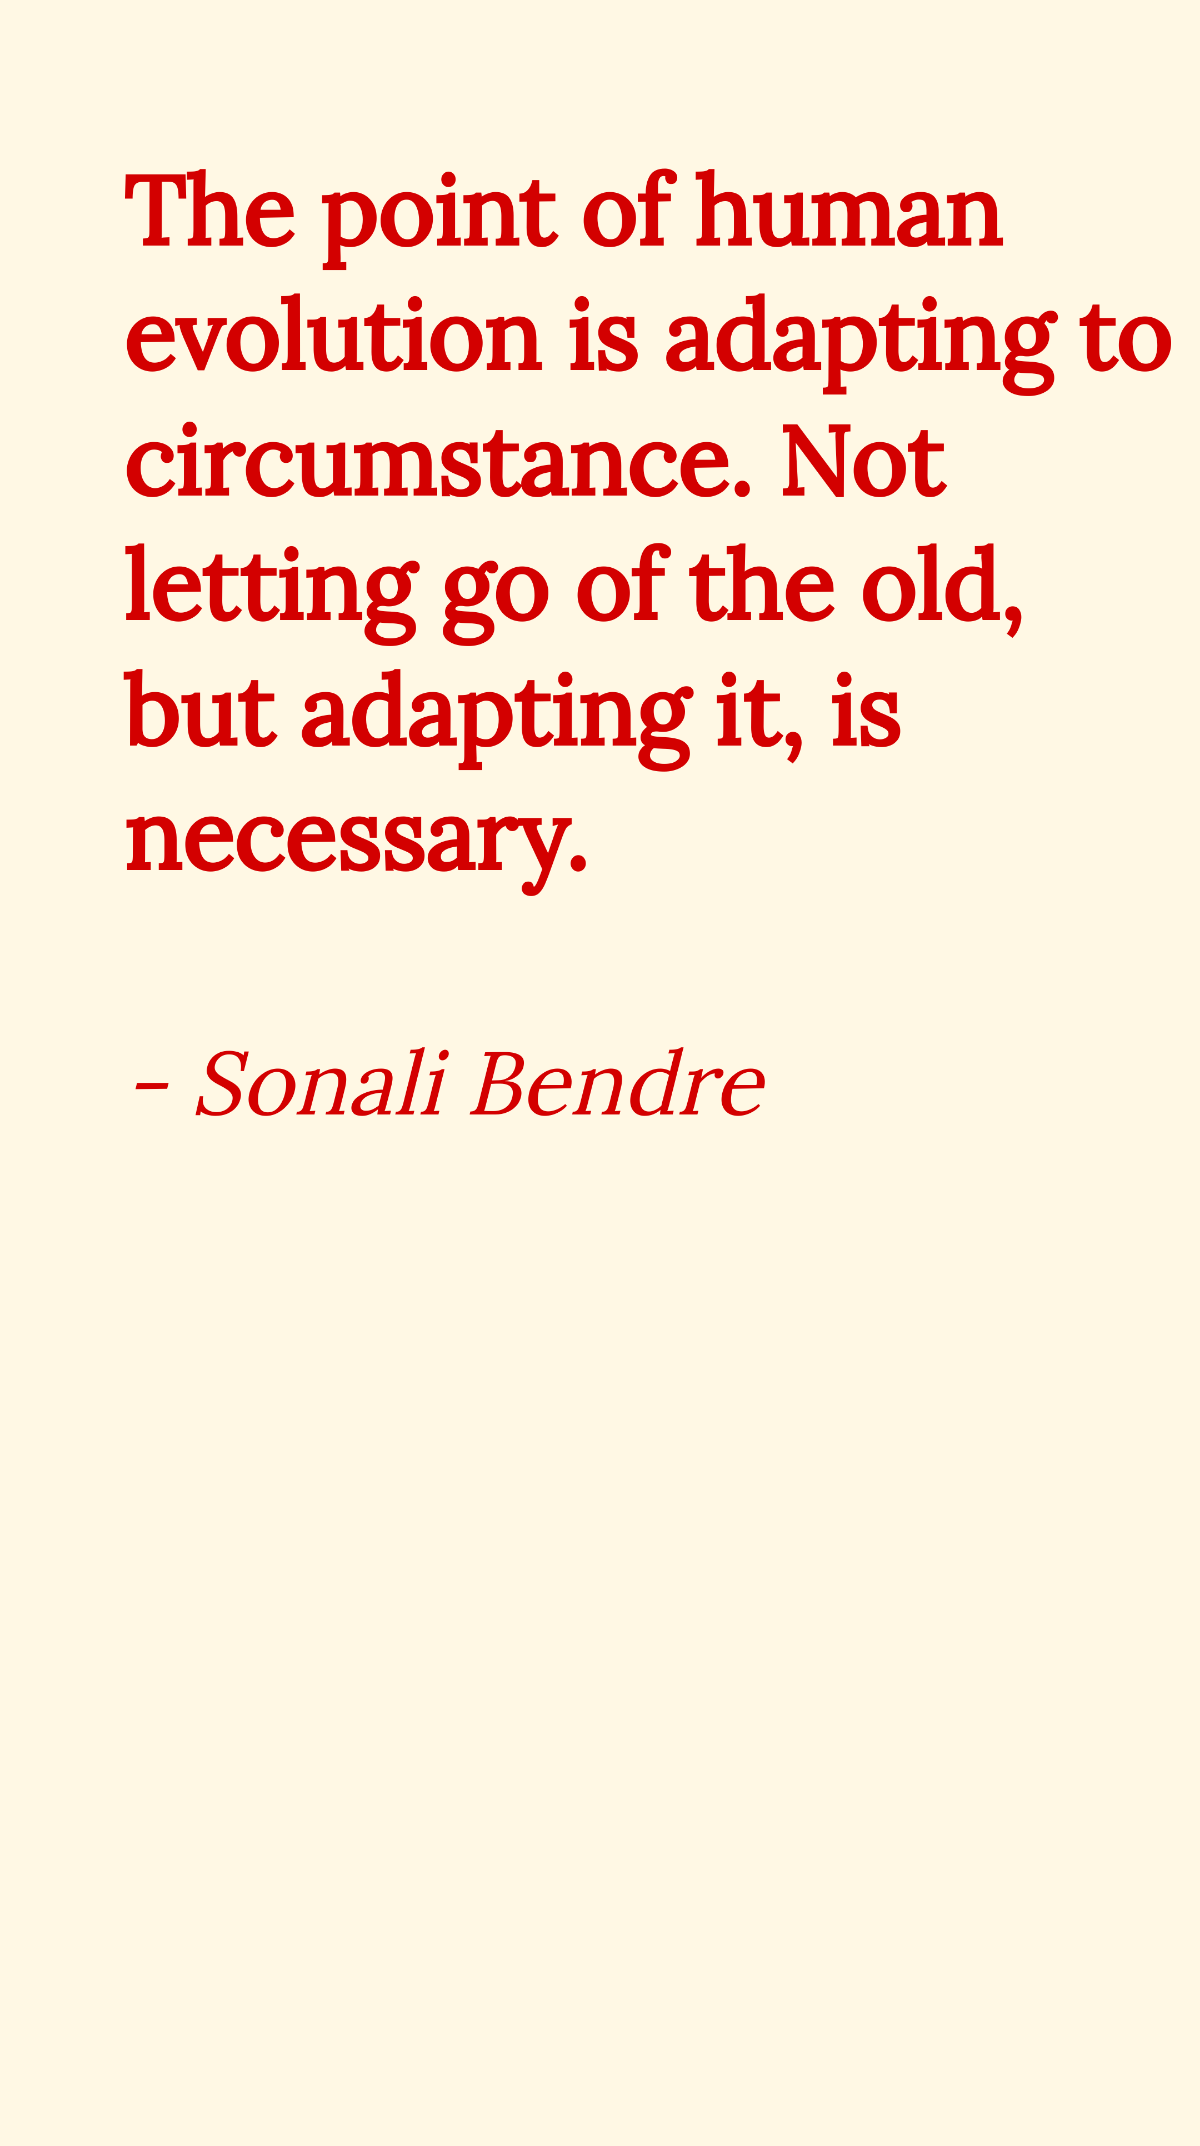 Sonali Bendre - The point of human evolution is adapting to circumstance. Not letting go of the old, but adapting it, is necessary. Template